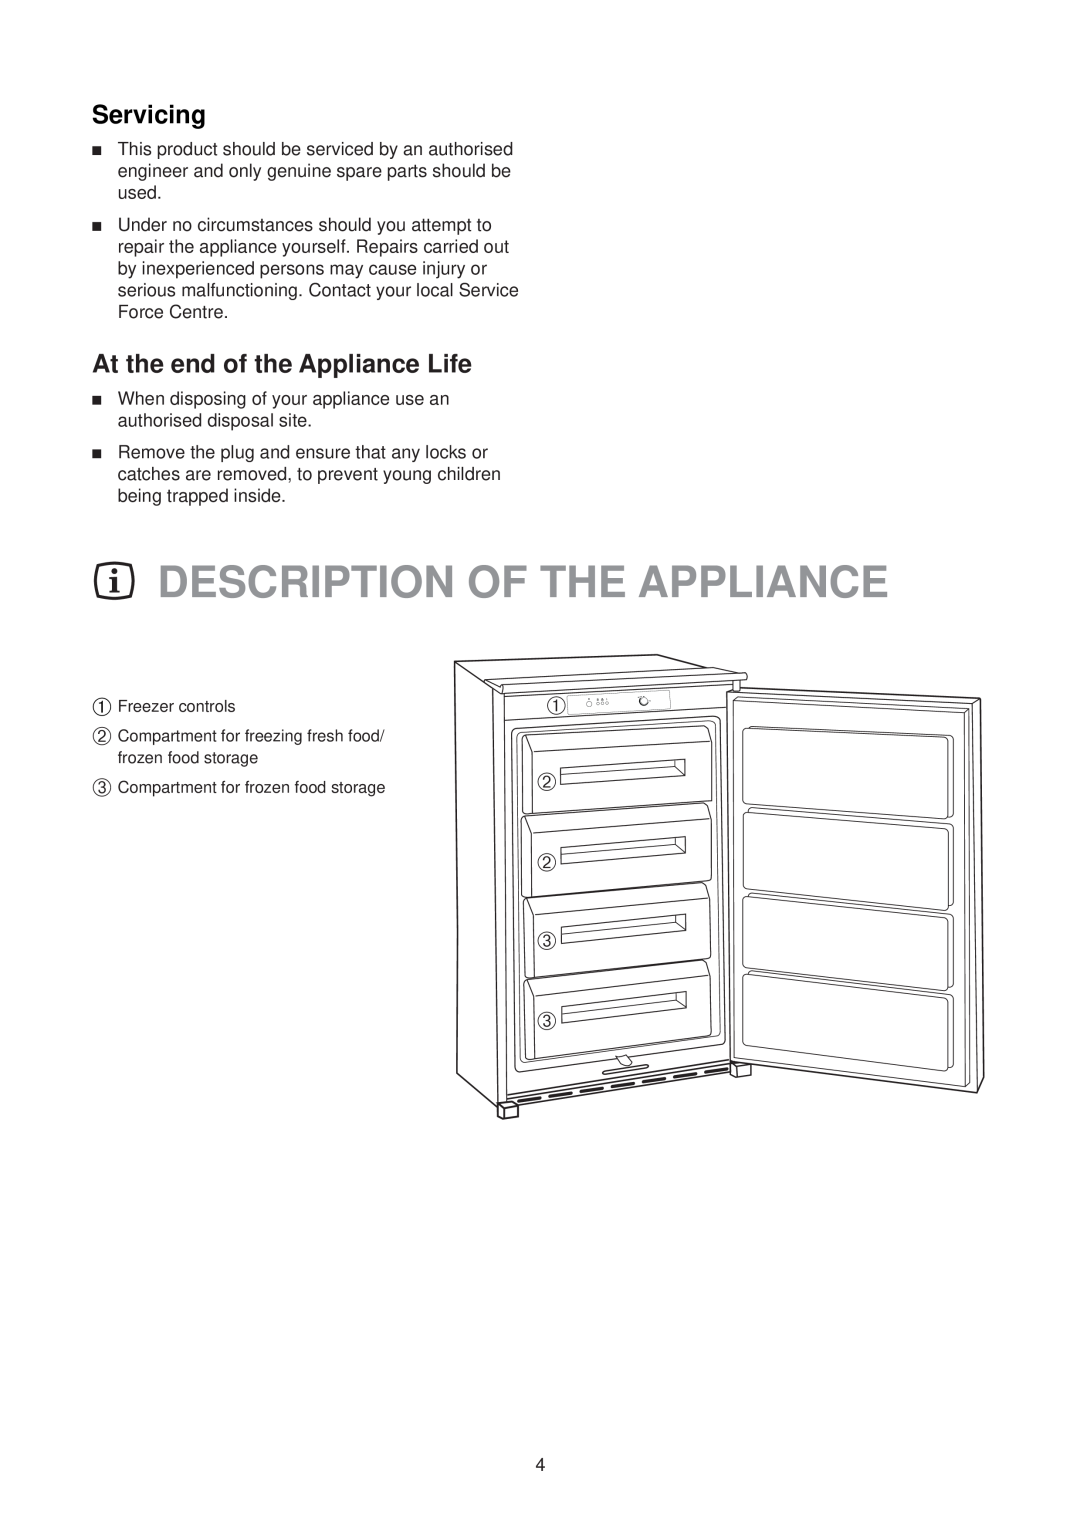 Electrolux EU 6233 manual Description Of The Appliance, Servicing, At the end of the Appliance Life, ➁ ➂ ➂ 